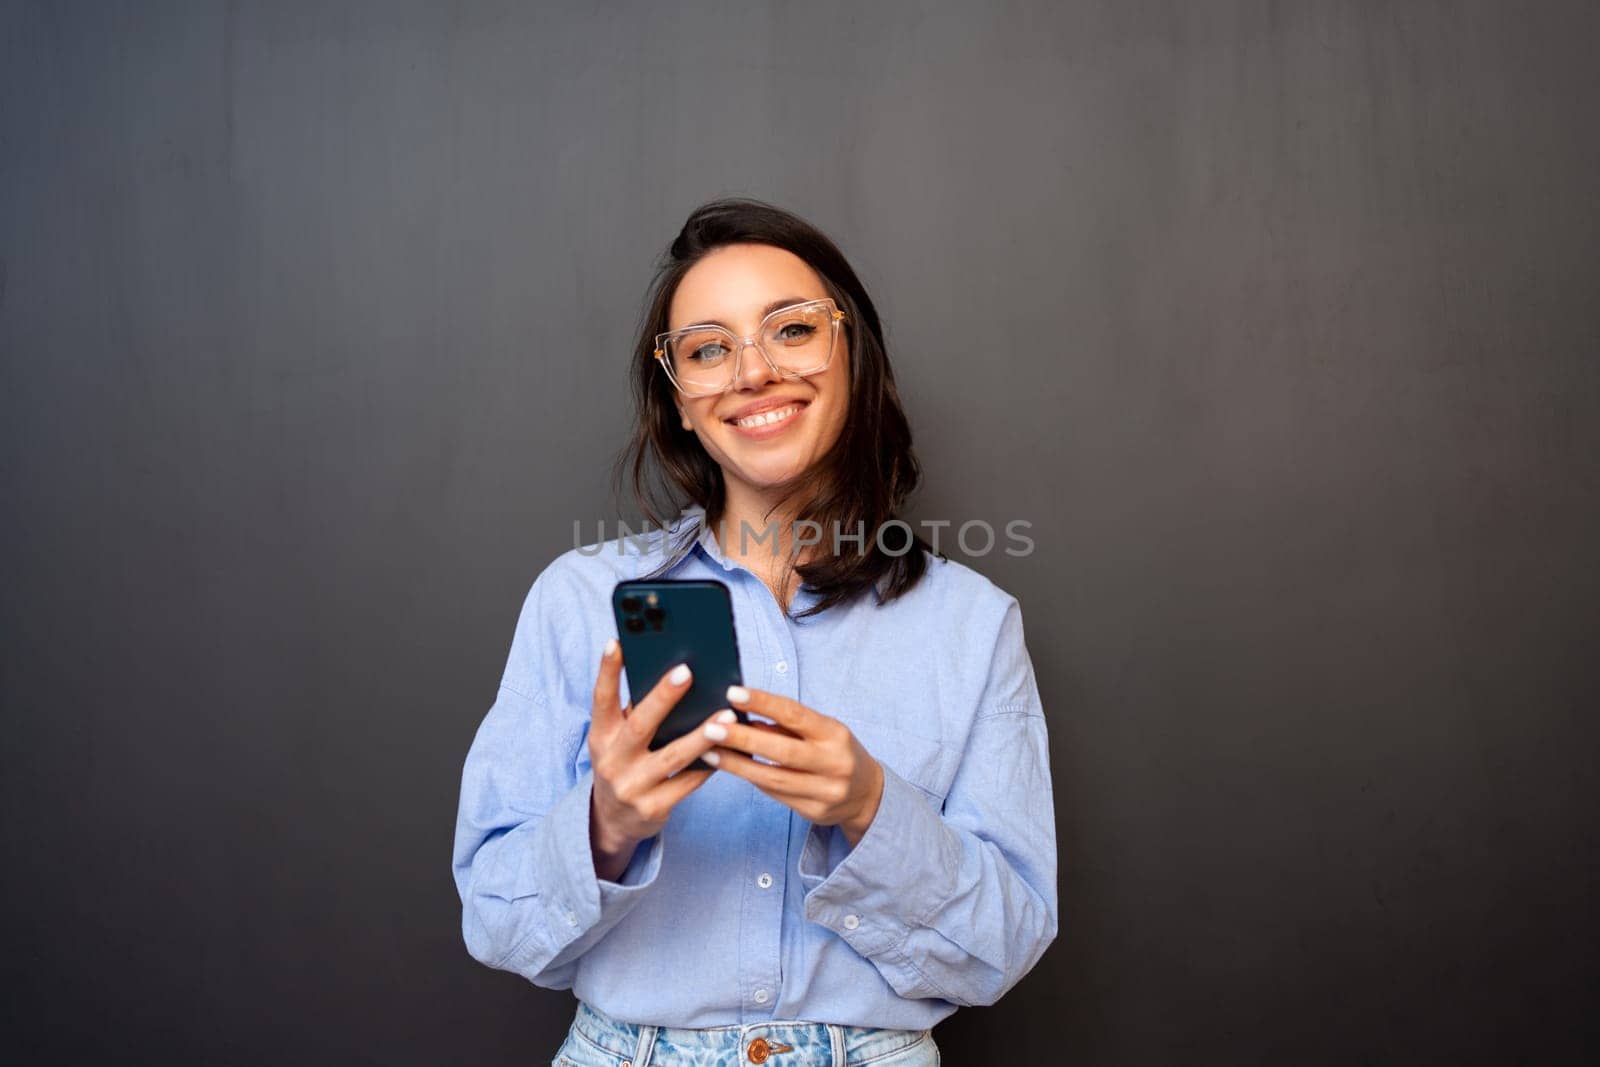 Woman wearing glasses poses with phone against black background. Girl in glasses, dressed blue shirt holding smartphone in hand